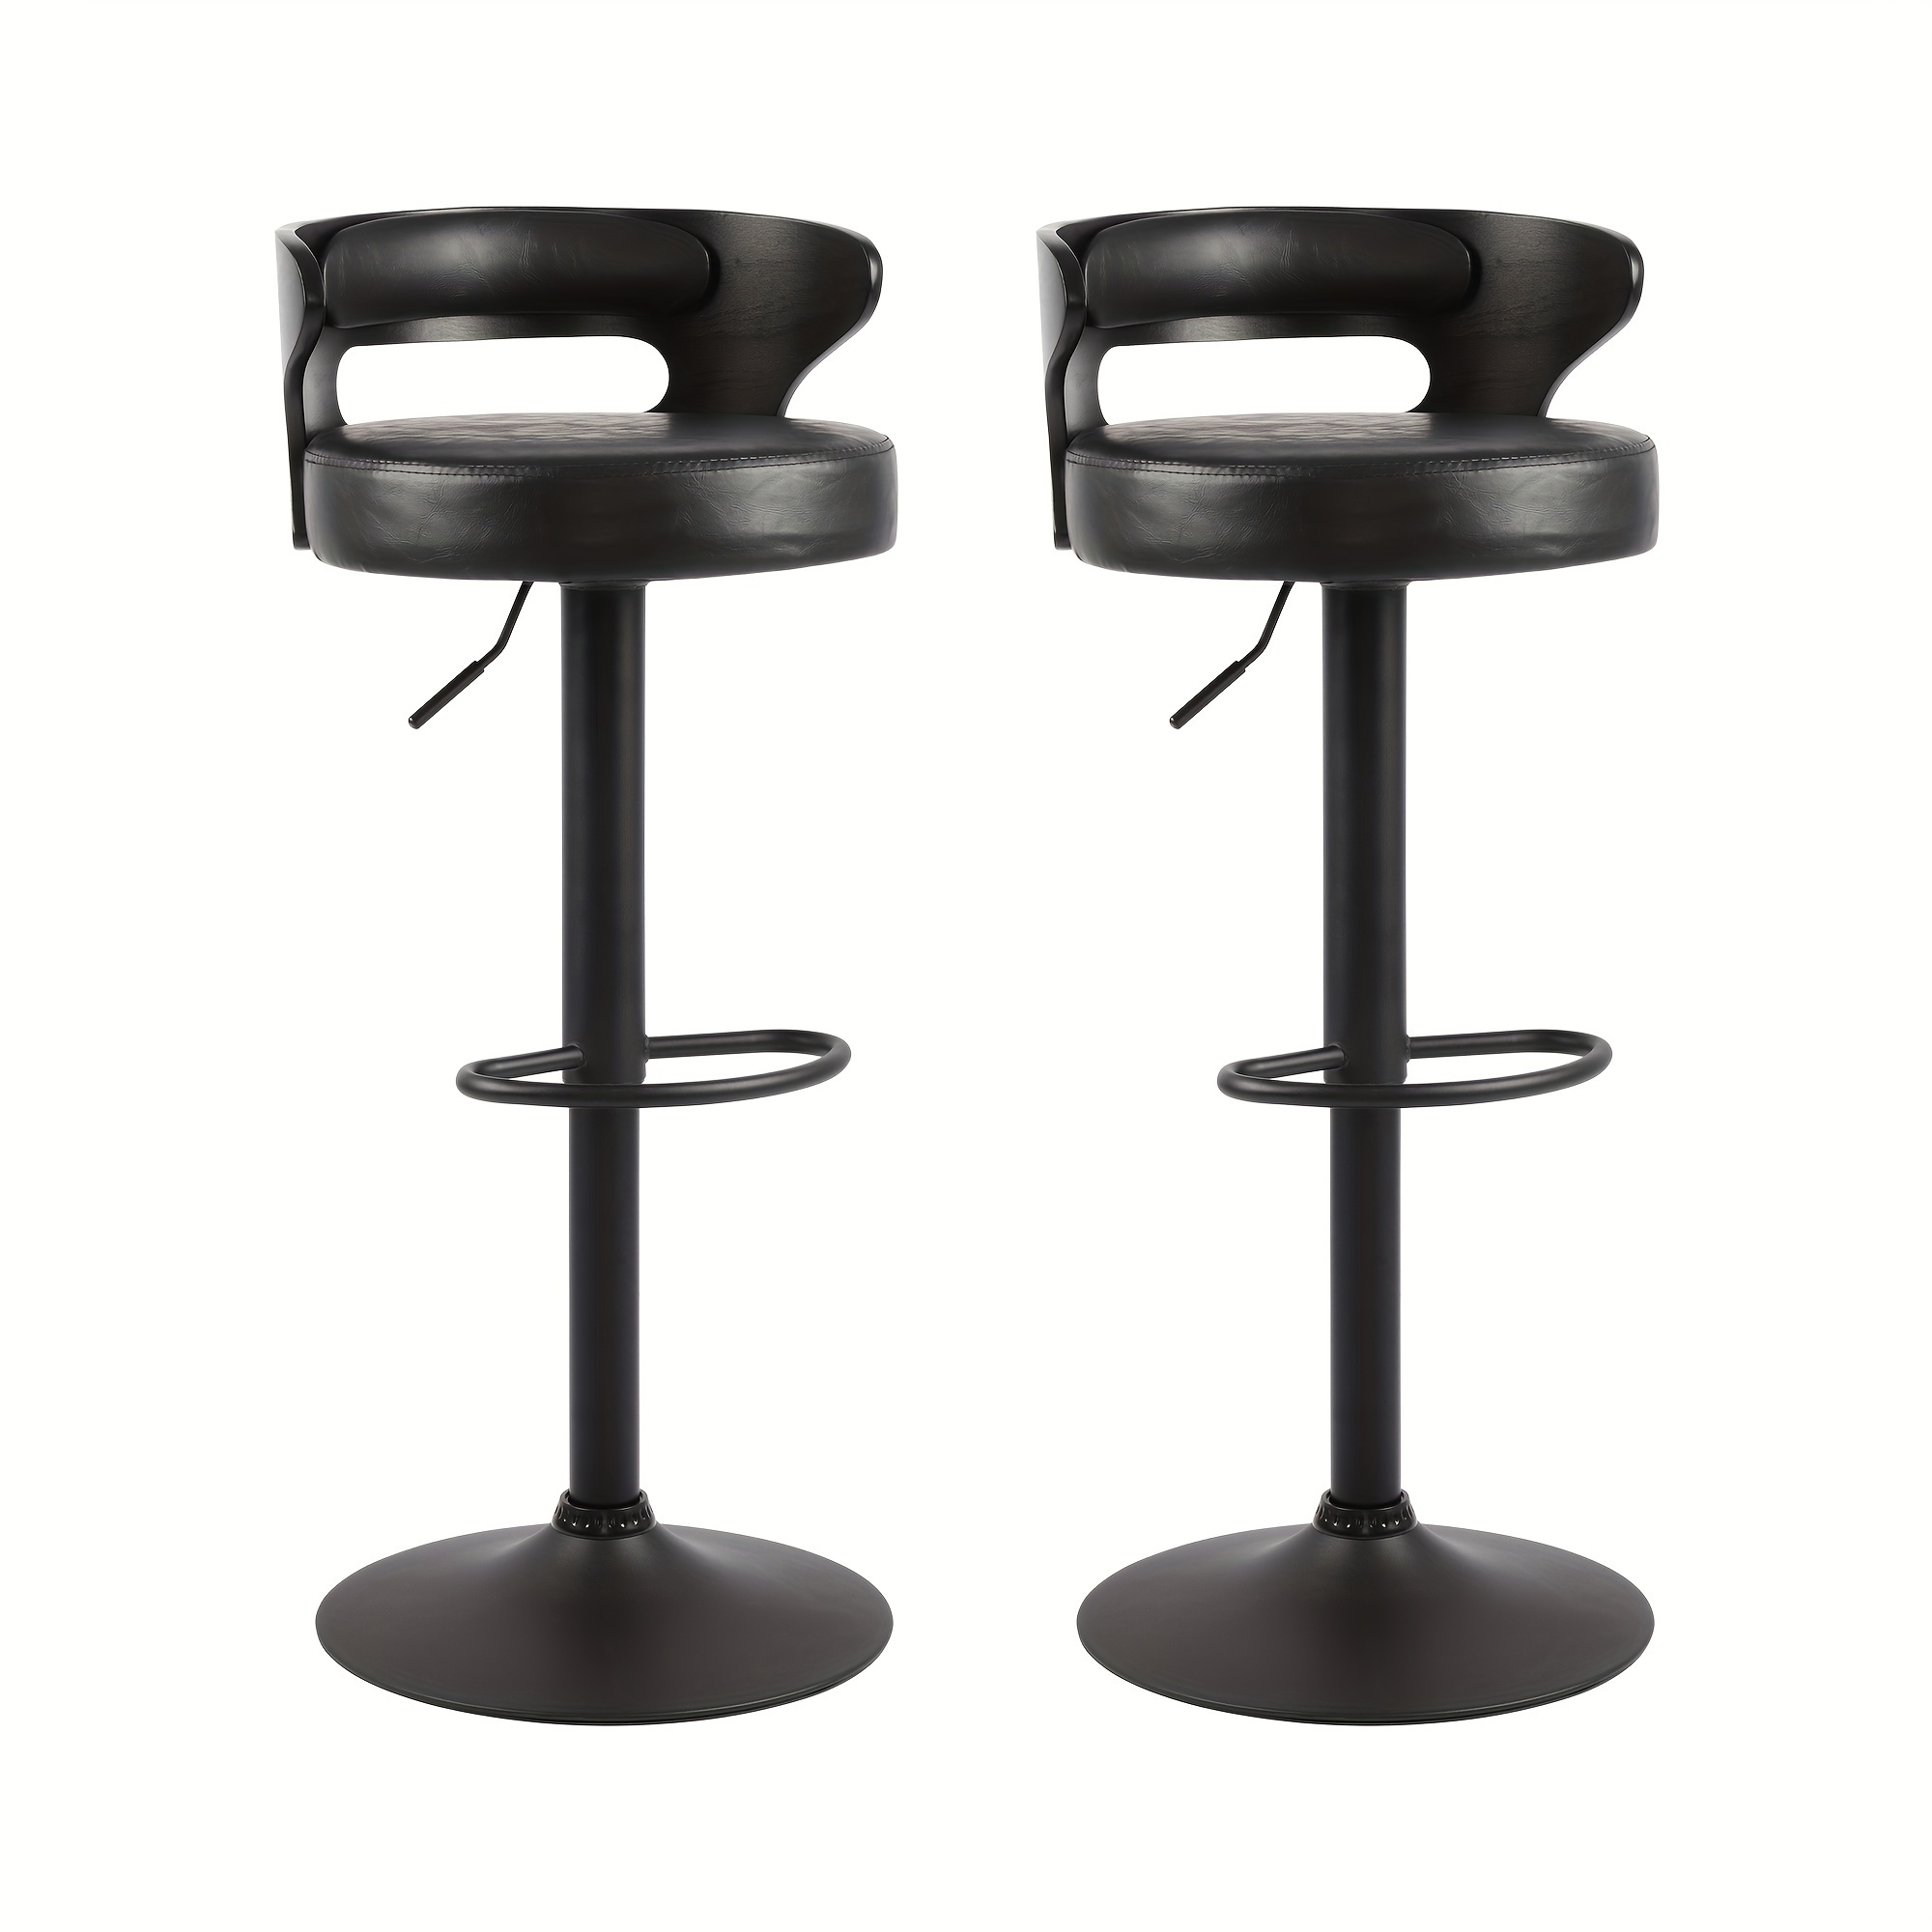 

Adjustable Swivel Bar Stools Set Of 2, Round Leather Upholstered Bar Chairs With Back & Footrest For Bar Kitchen Dining Room, Black